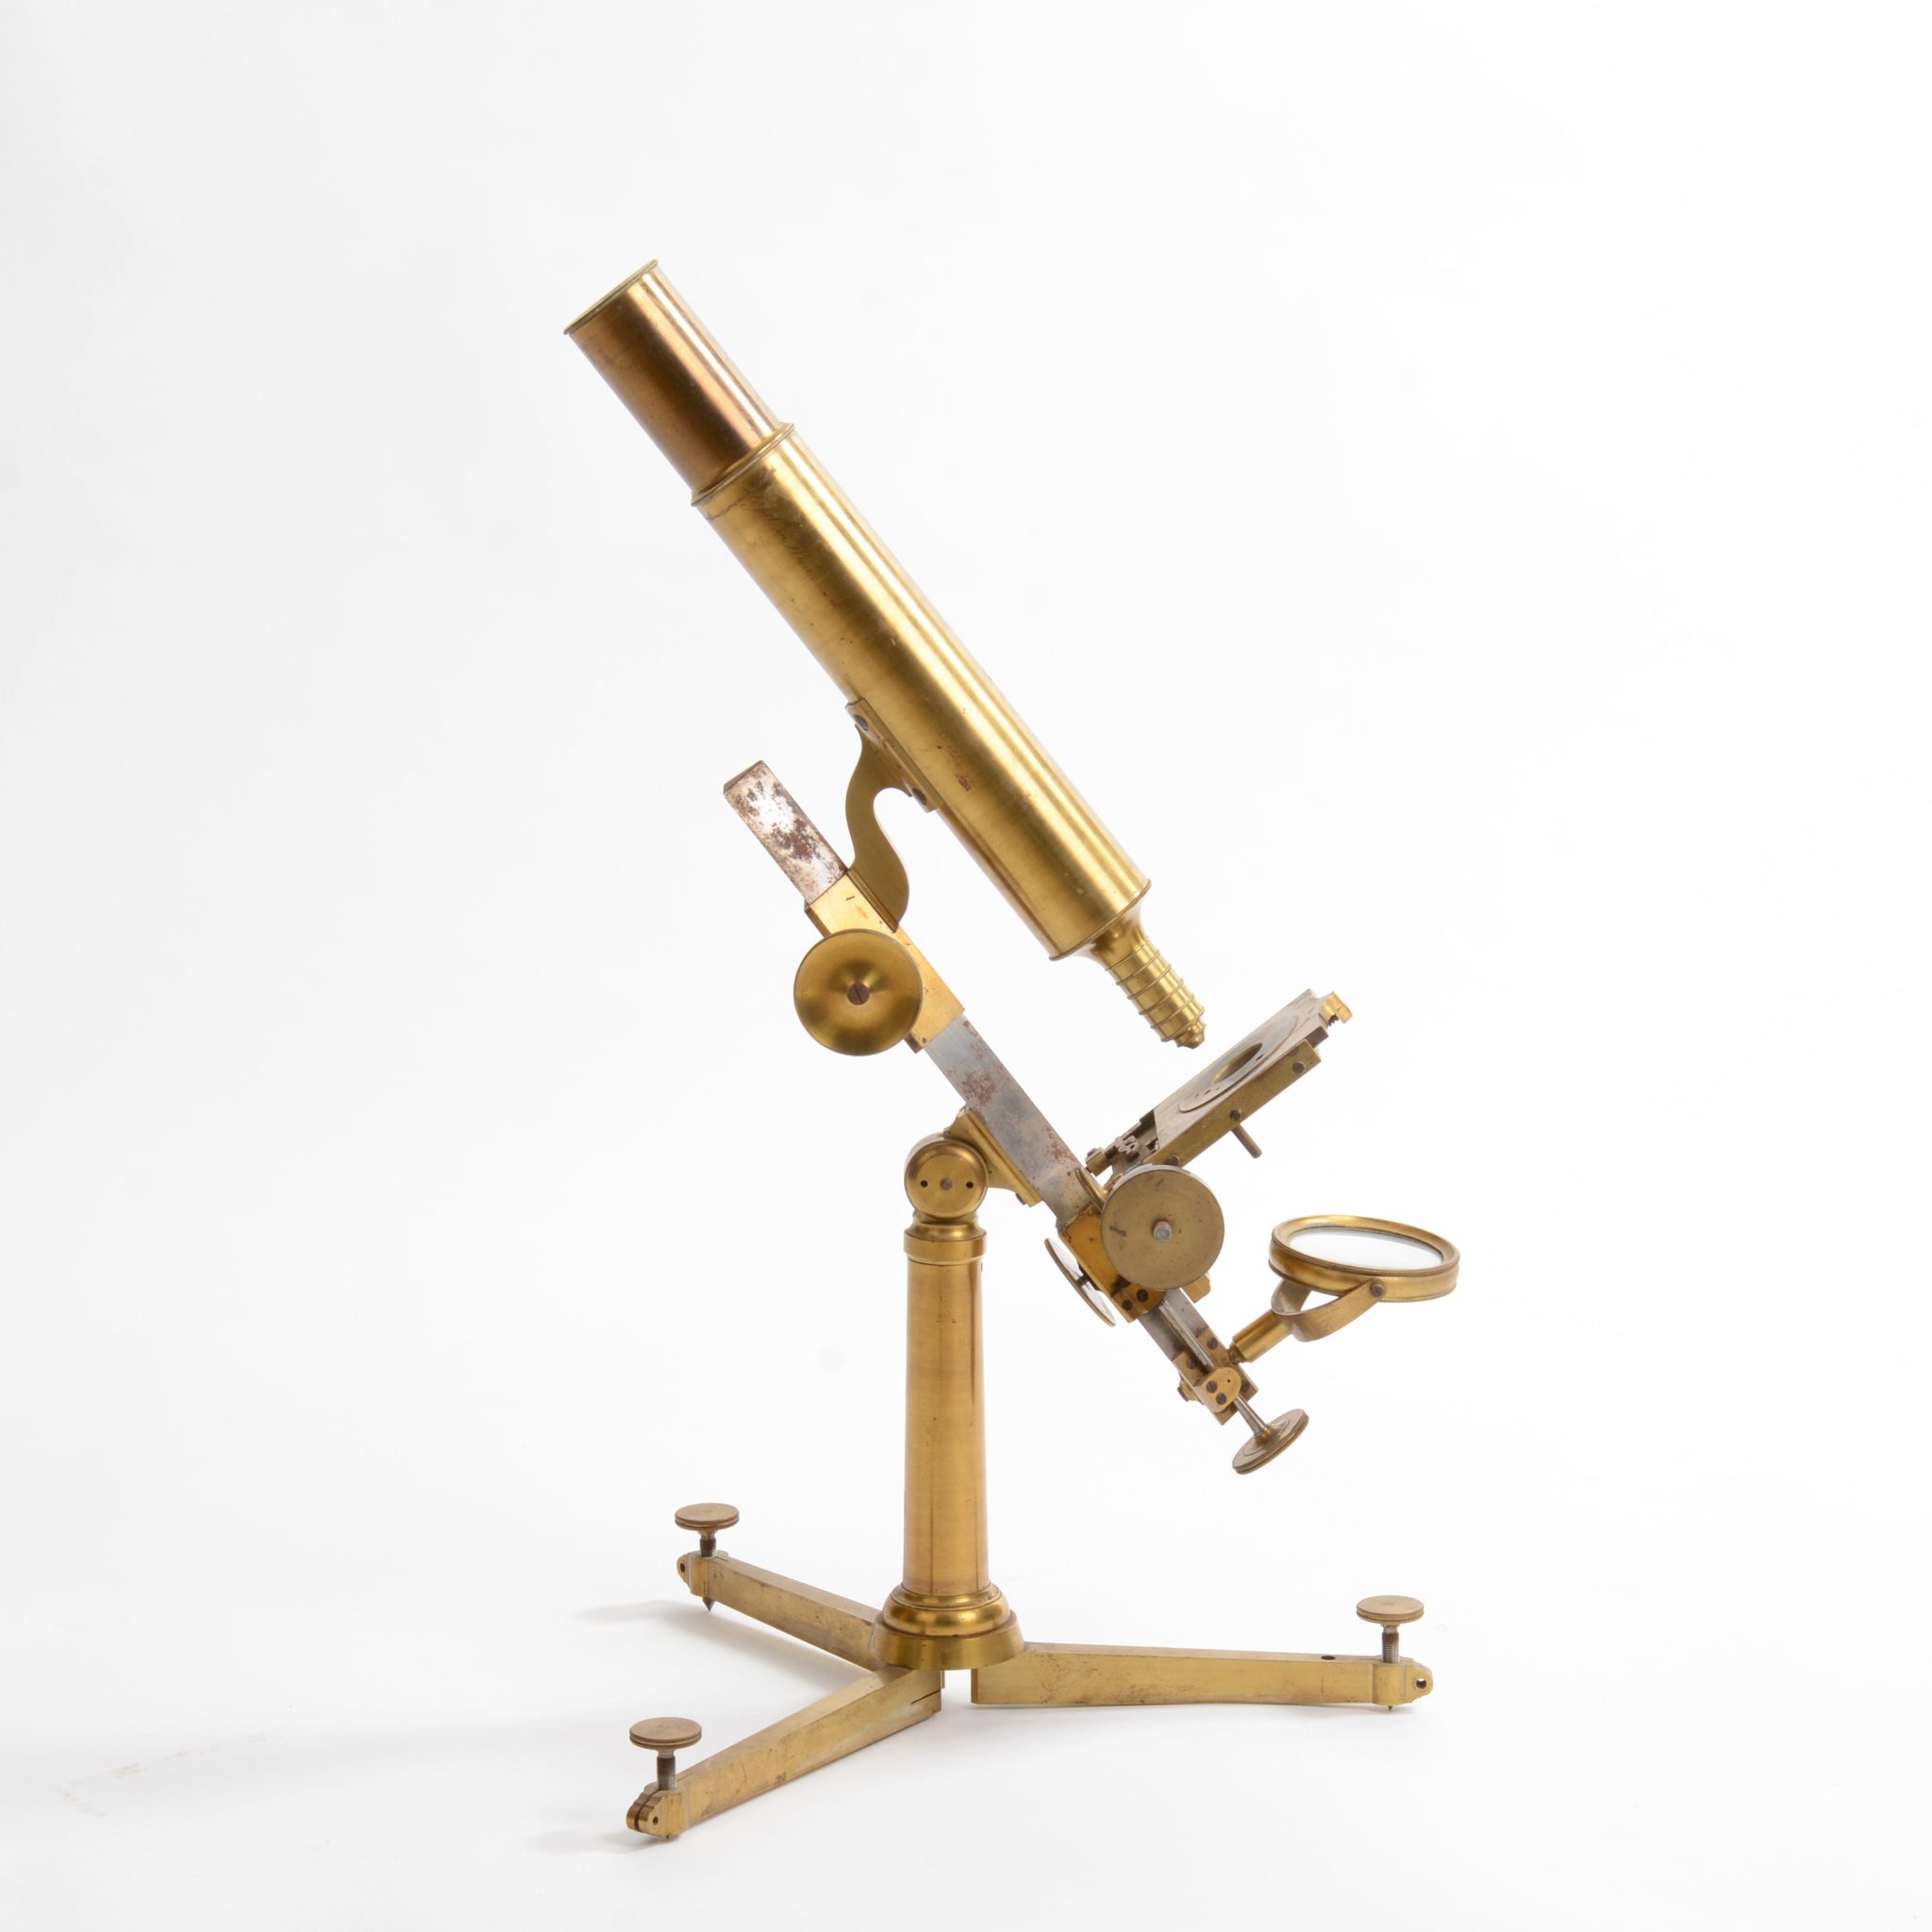 A rare & early largest Microscope by Simon Georg Ploessl (1794-1868)